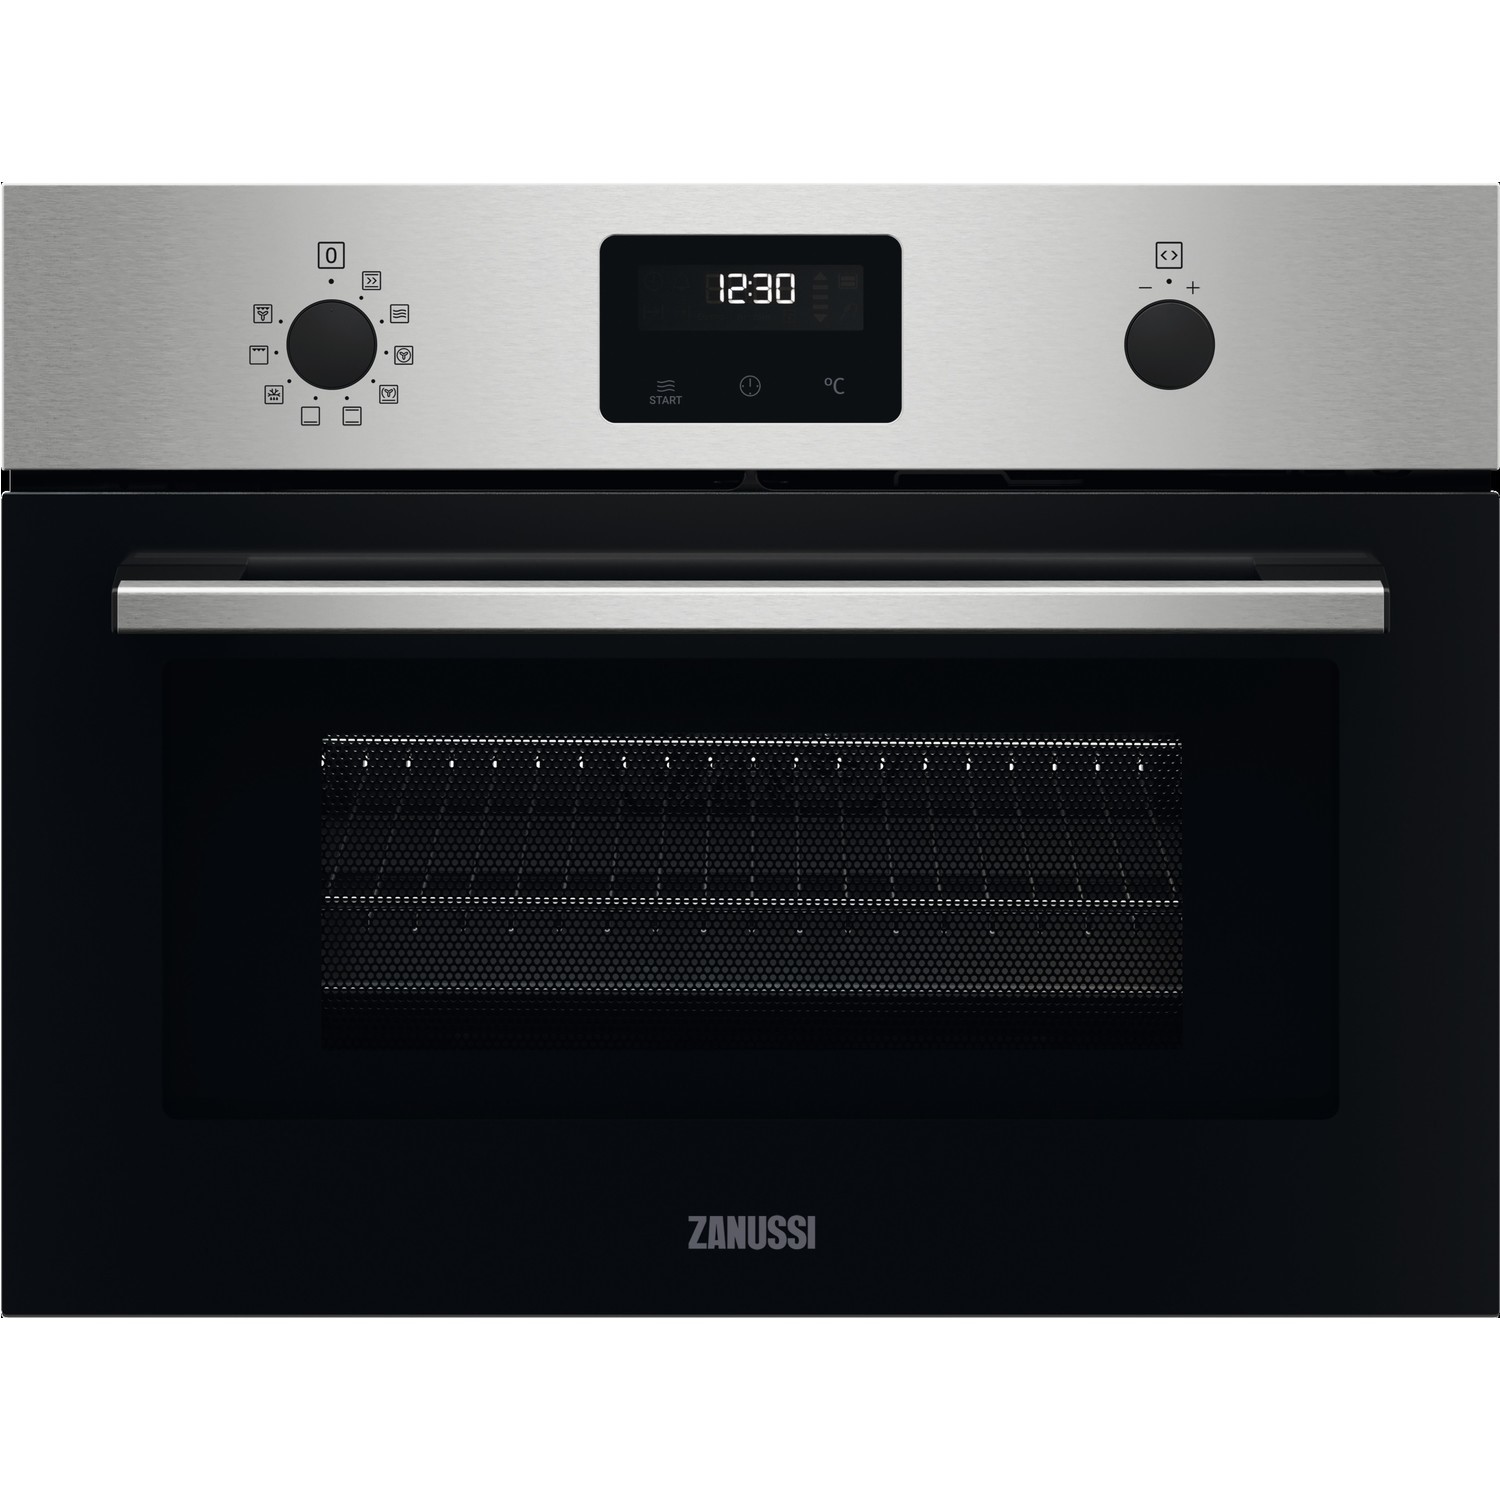 Zanussi Quickcook Compact Combination Microwave Oven and Grill - Stainless Steel